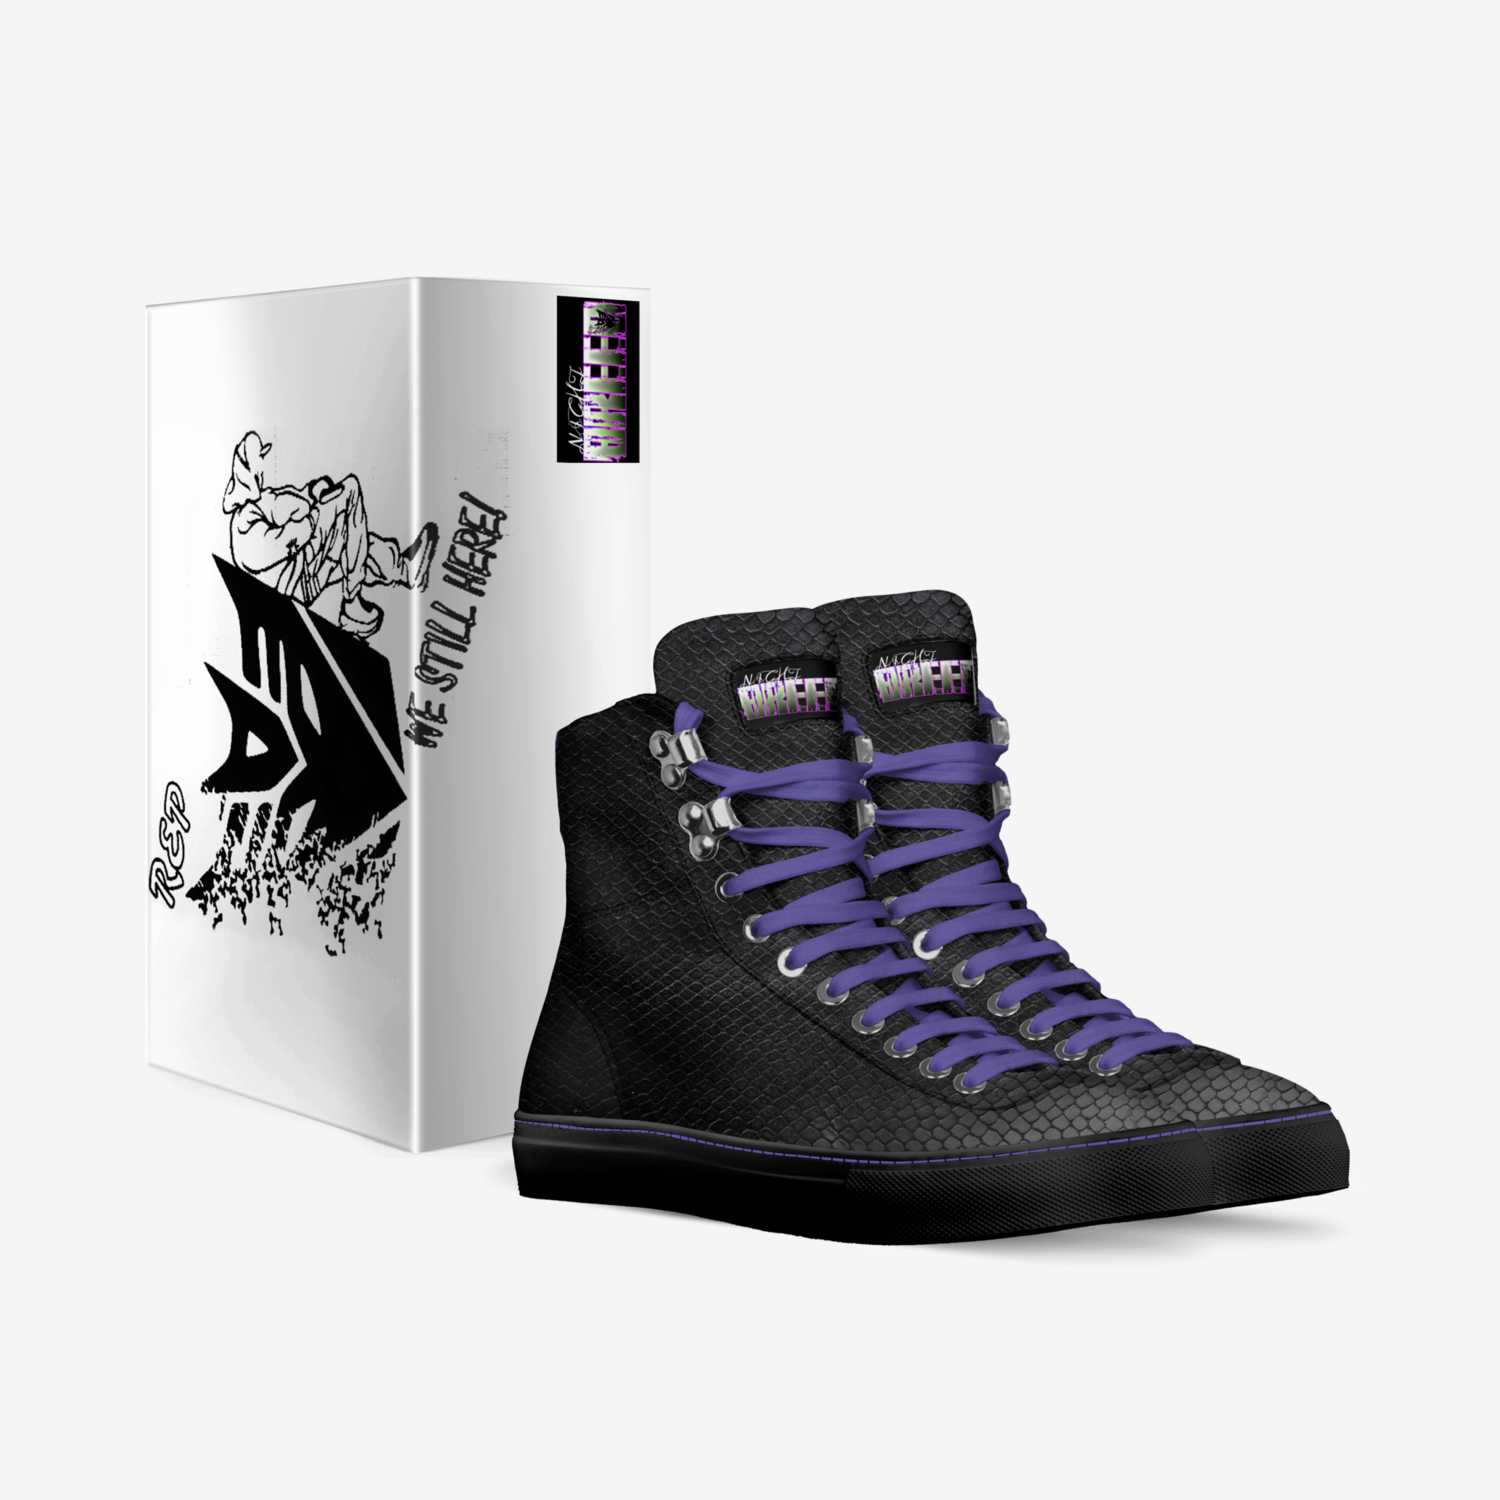 NIGHTBREED'S-FBC'S custom made in Italy shoes by Ira Pearson | Box view